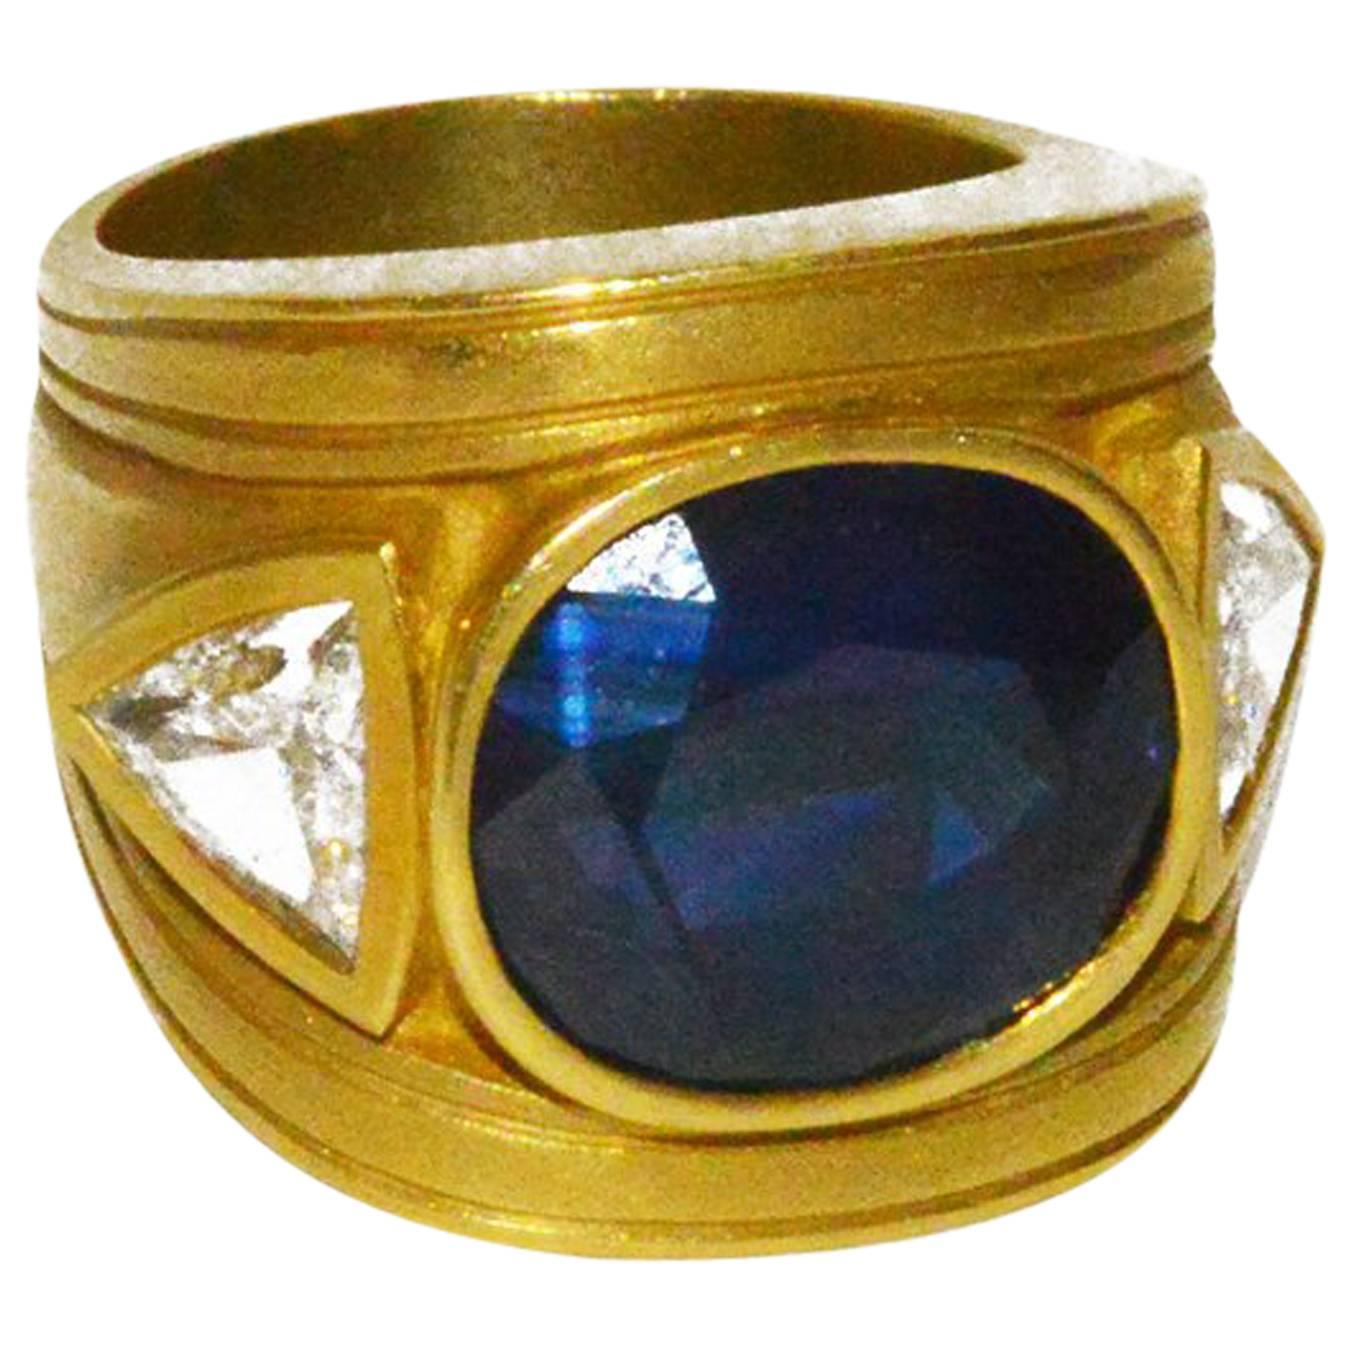 Barry Kieselstein-Cord Sapphire Diamond Gold Ring For Sale